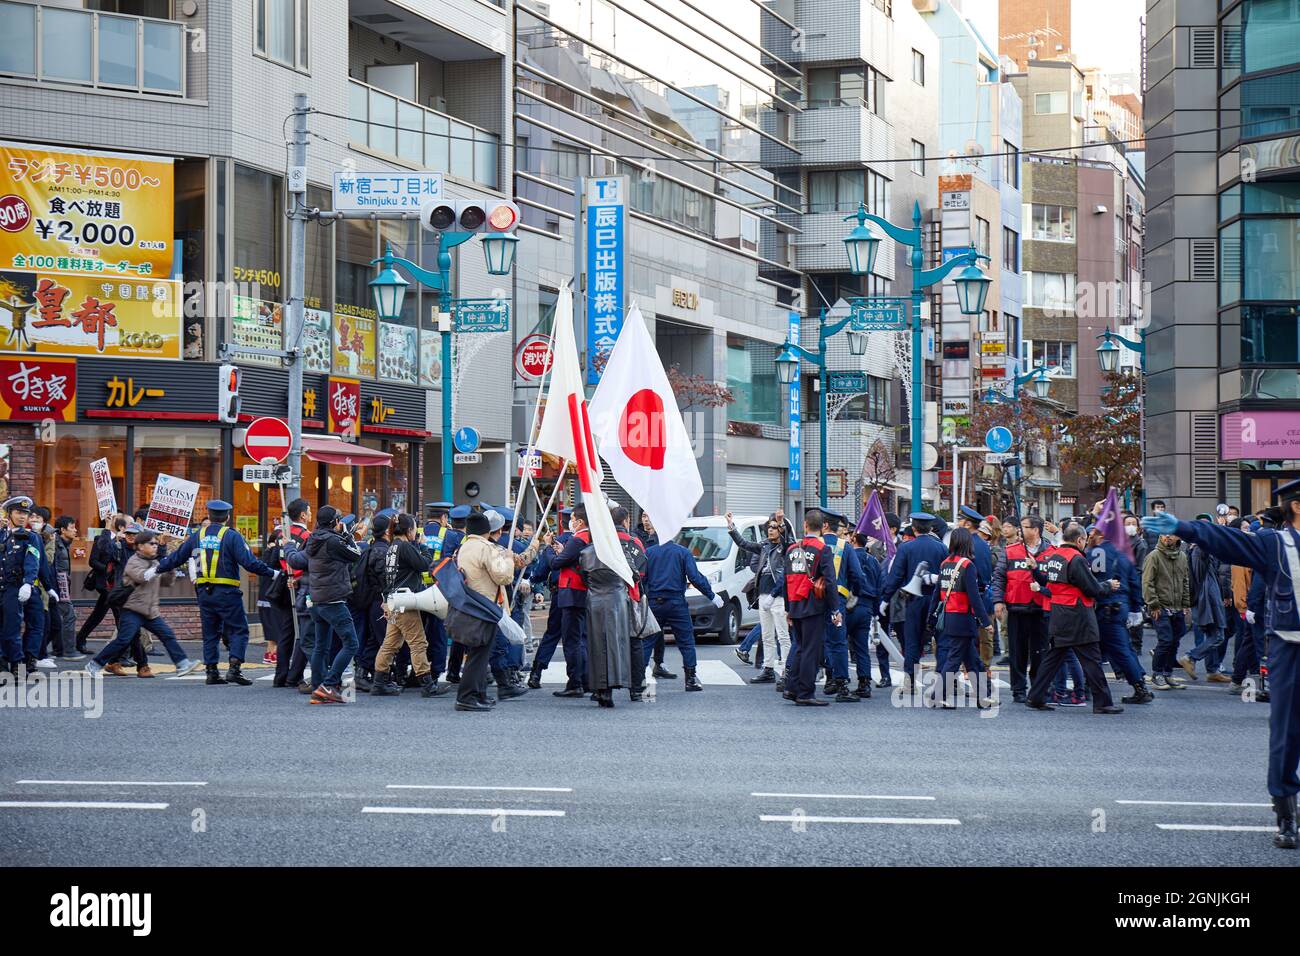 Japanese right-wing/nationalist protest in Shinjuku, Tokyo Stock Photo